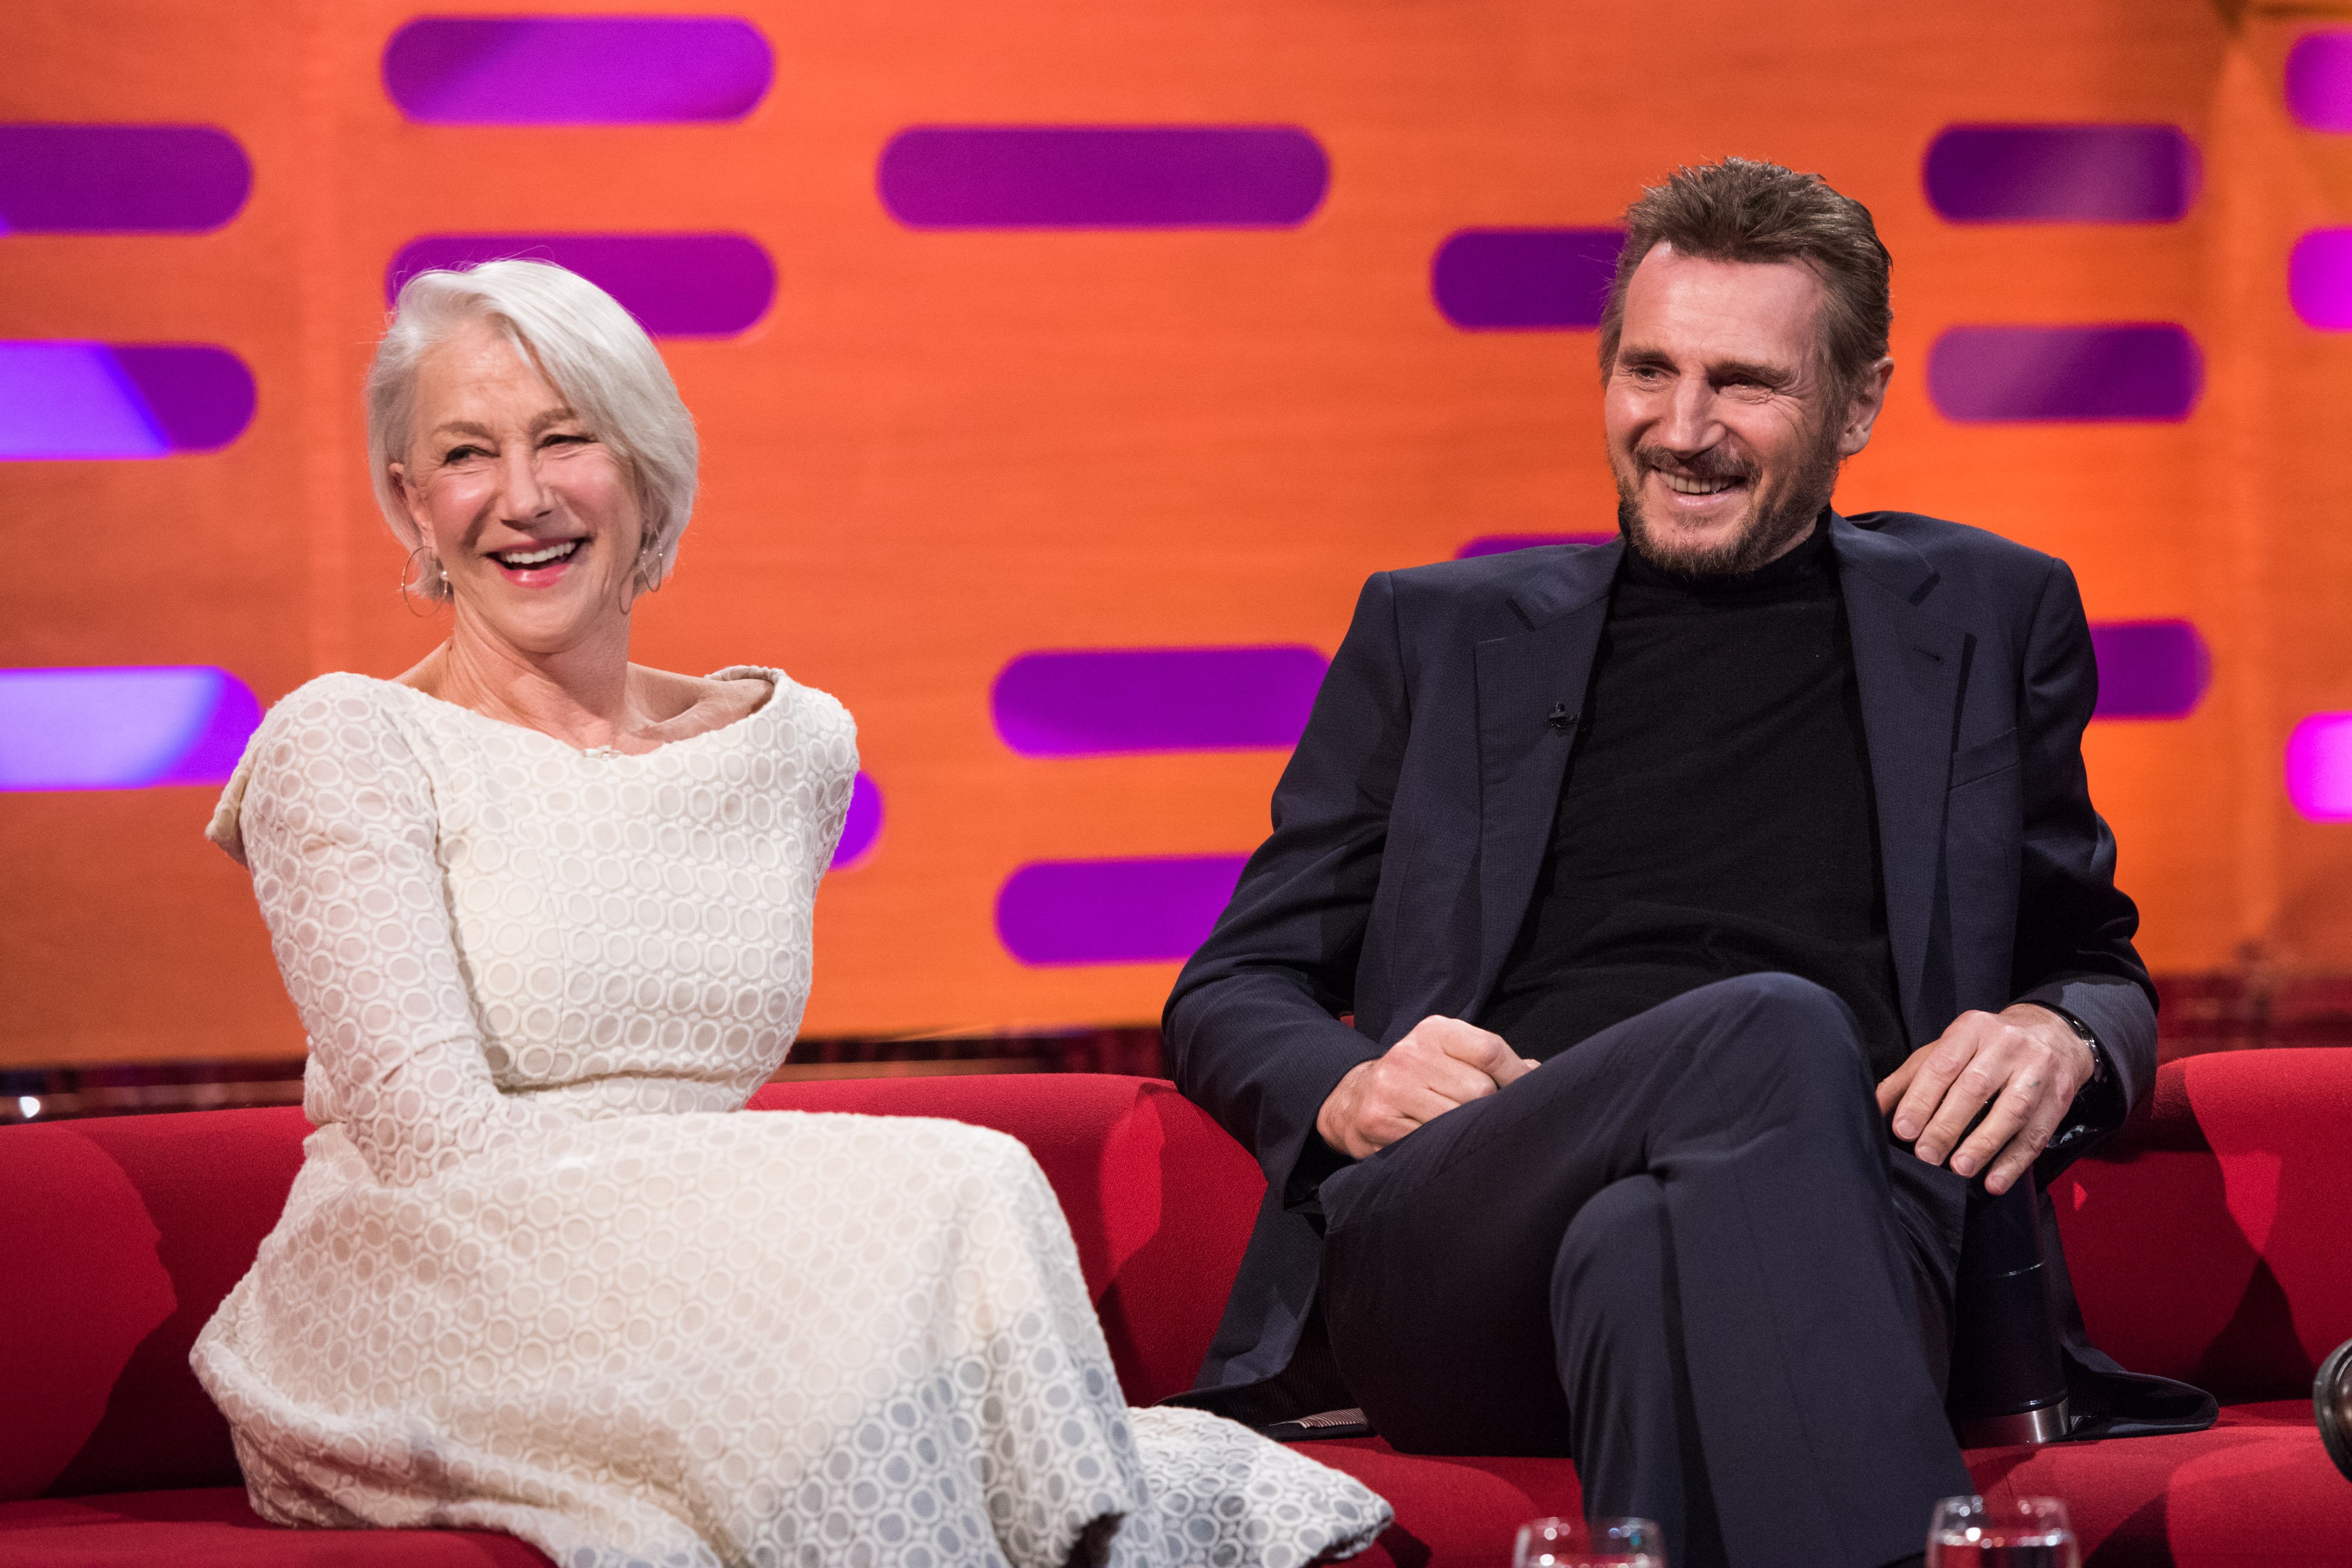 Helen Mirren and Liam Neeson at The London Studios, South London, 2018 | Source: Getty Images